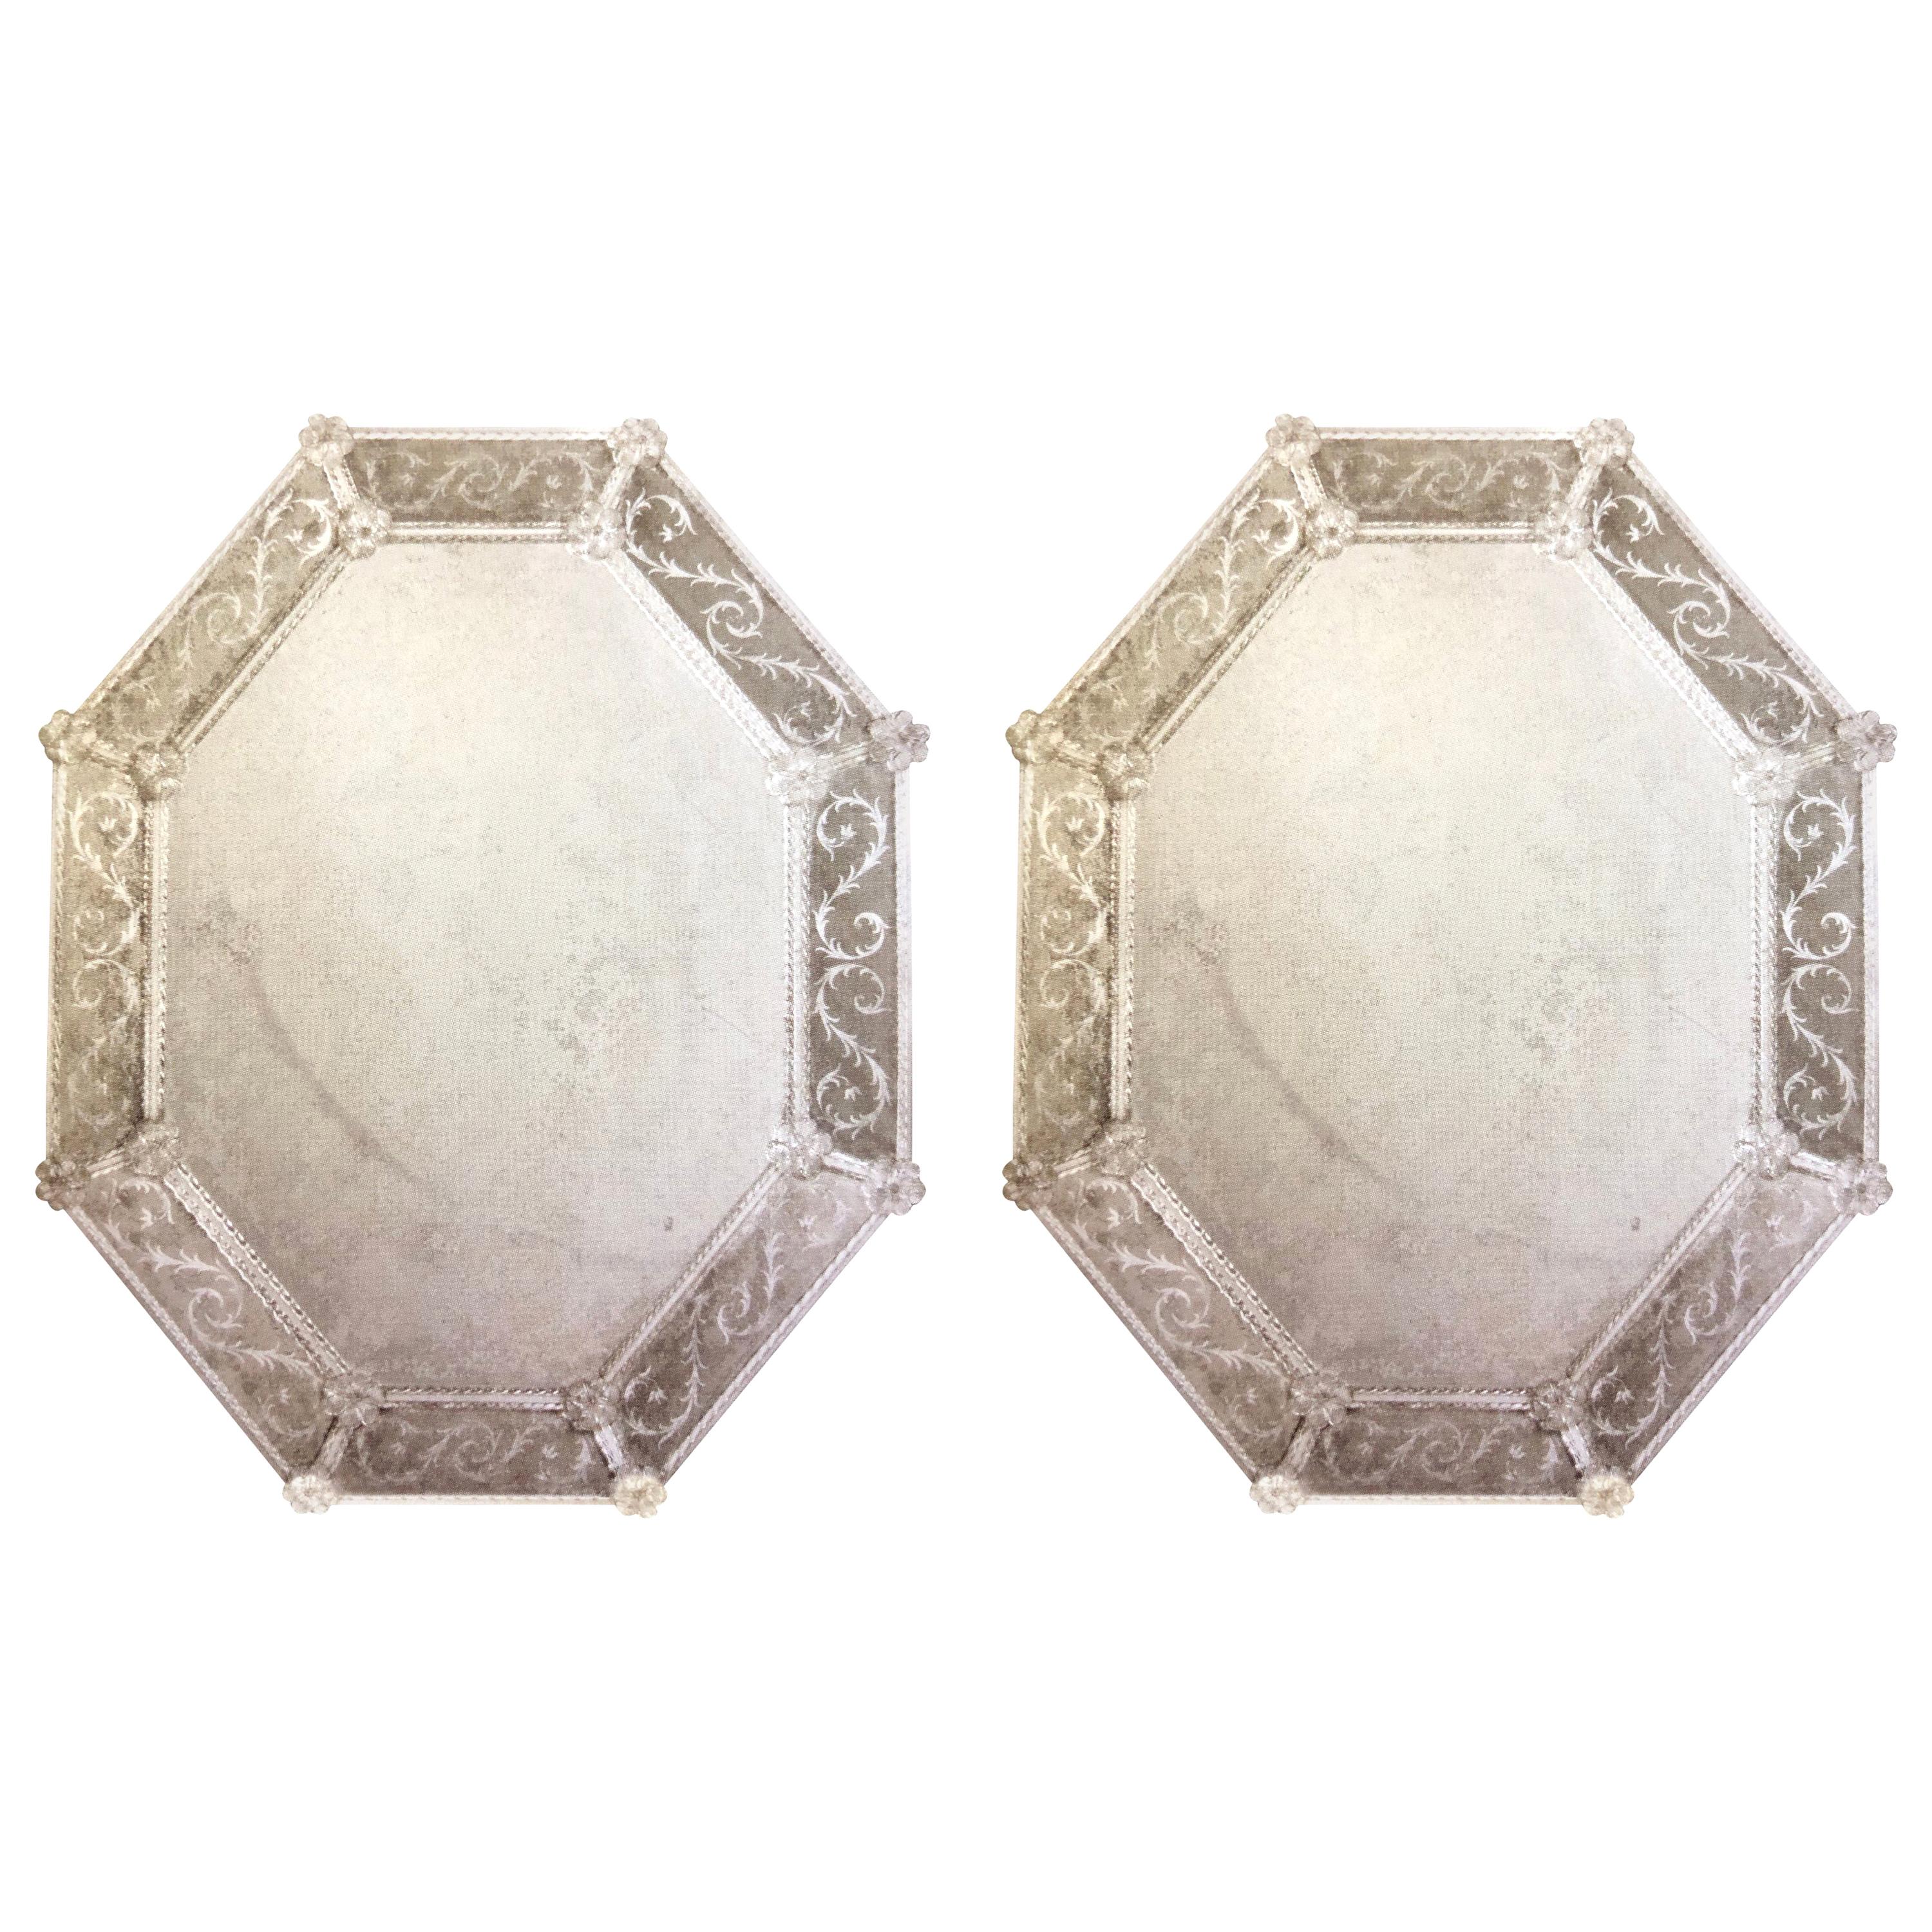 Two Large Antiqued and Etched Venetian / Murano Glass Octagonal Wall Mirrors For Sale